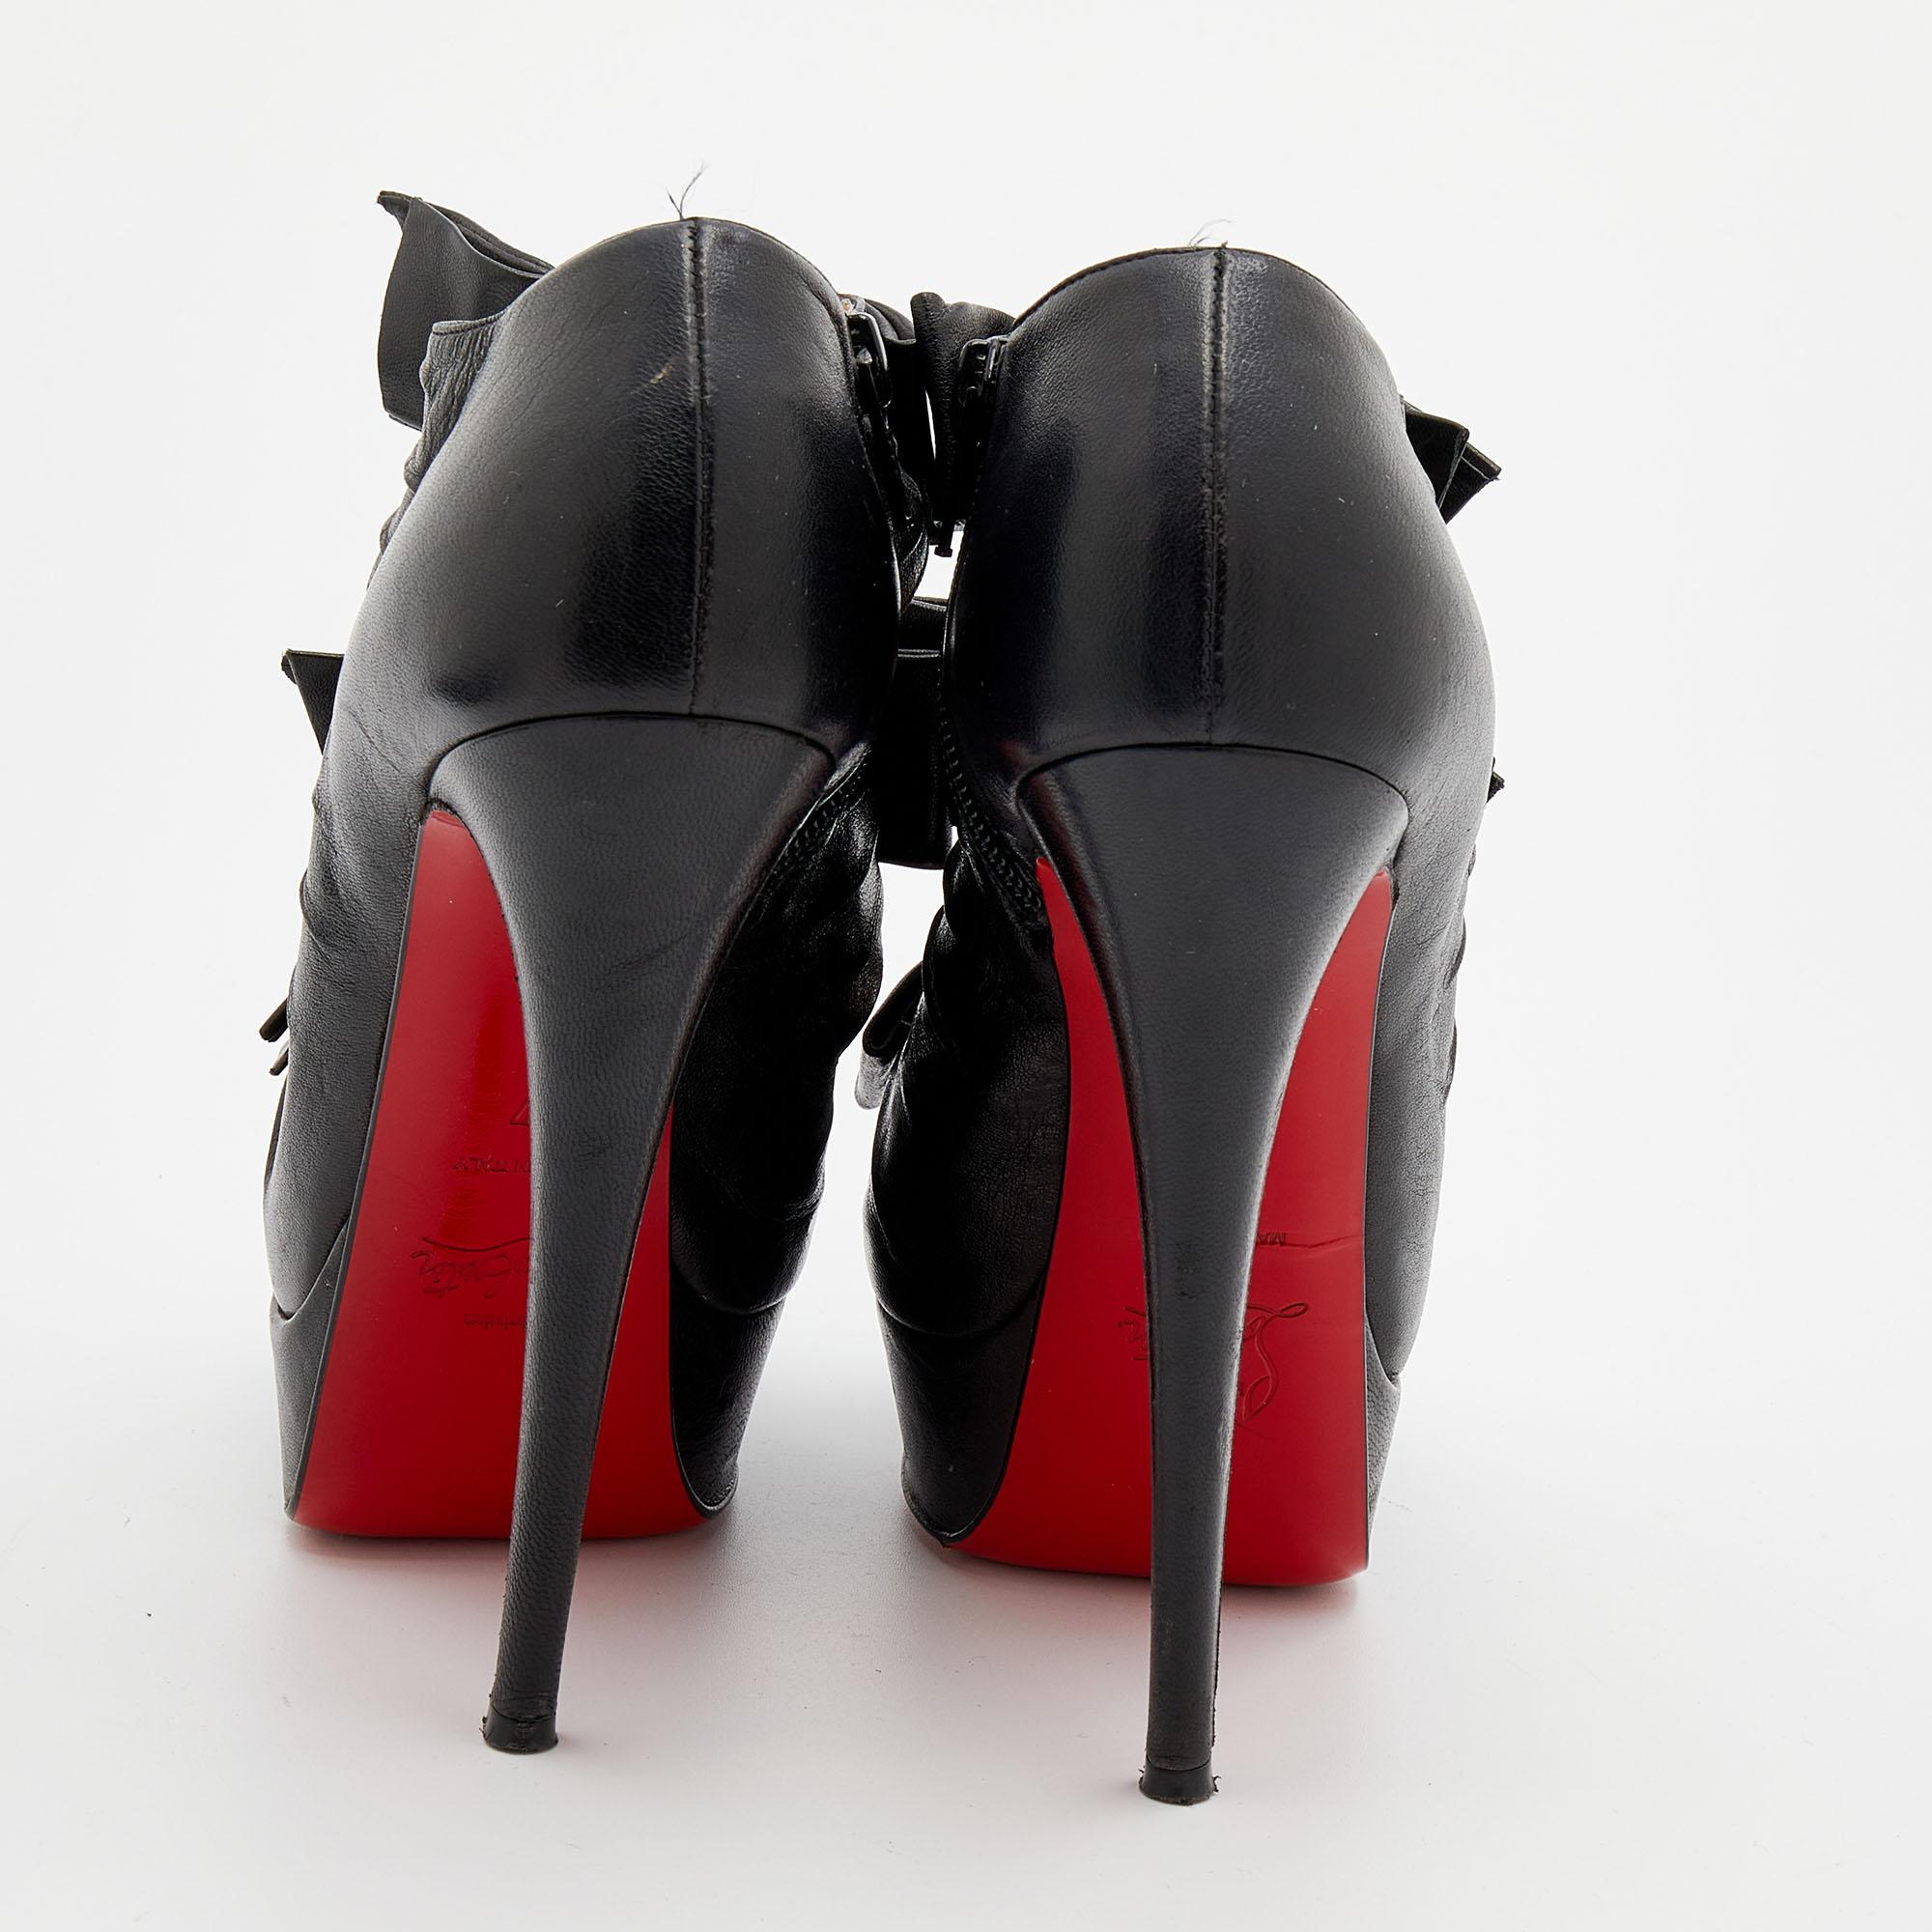 These peep-toe booties from Christian Louboutin are all about making a style statement. They are crafted using black leather with three knotted bow details on each upper. They have been incorporated with smooth insoles and towering 14.5 cm heels.